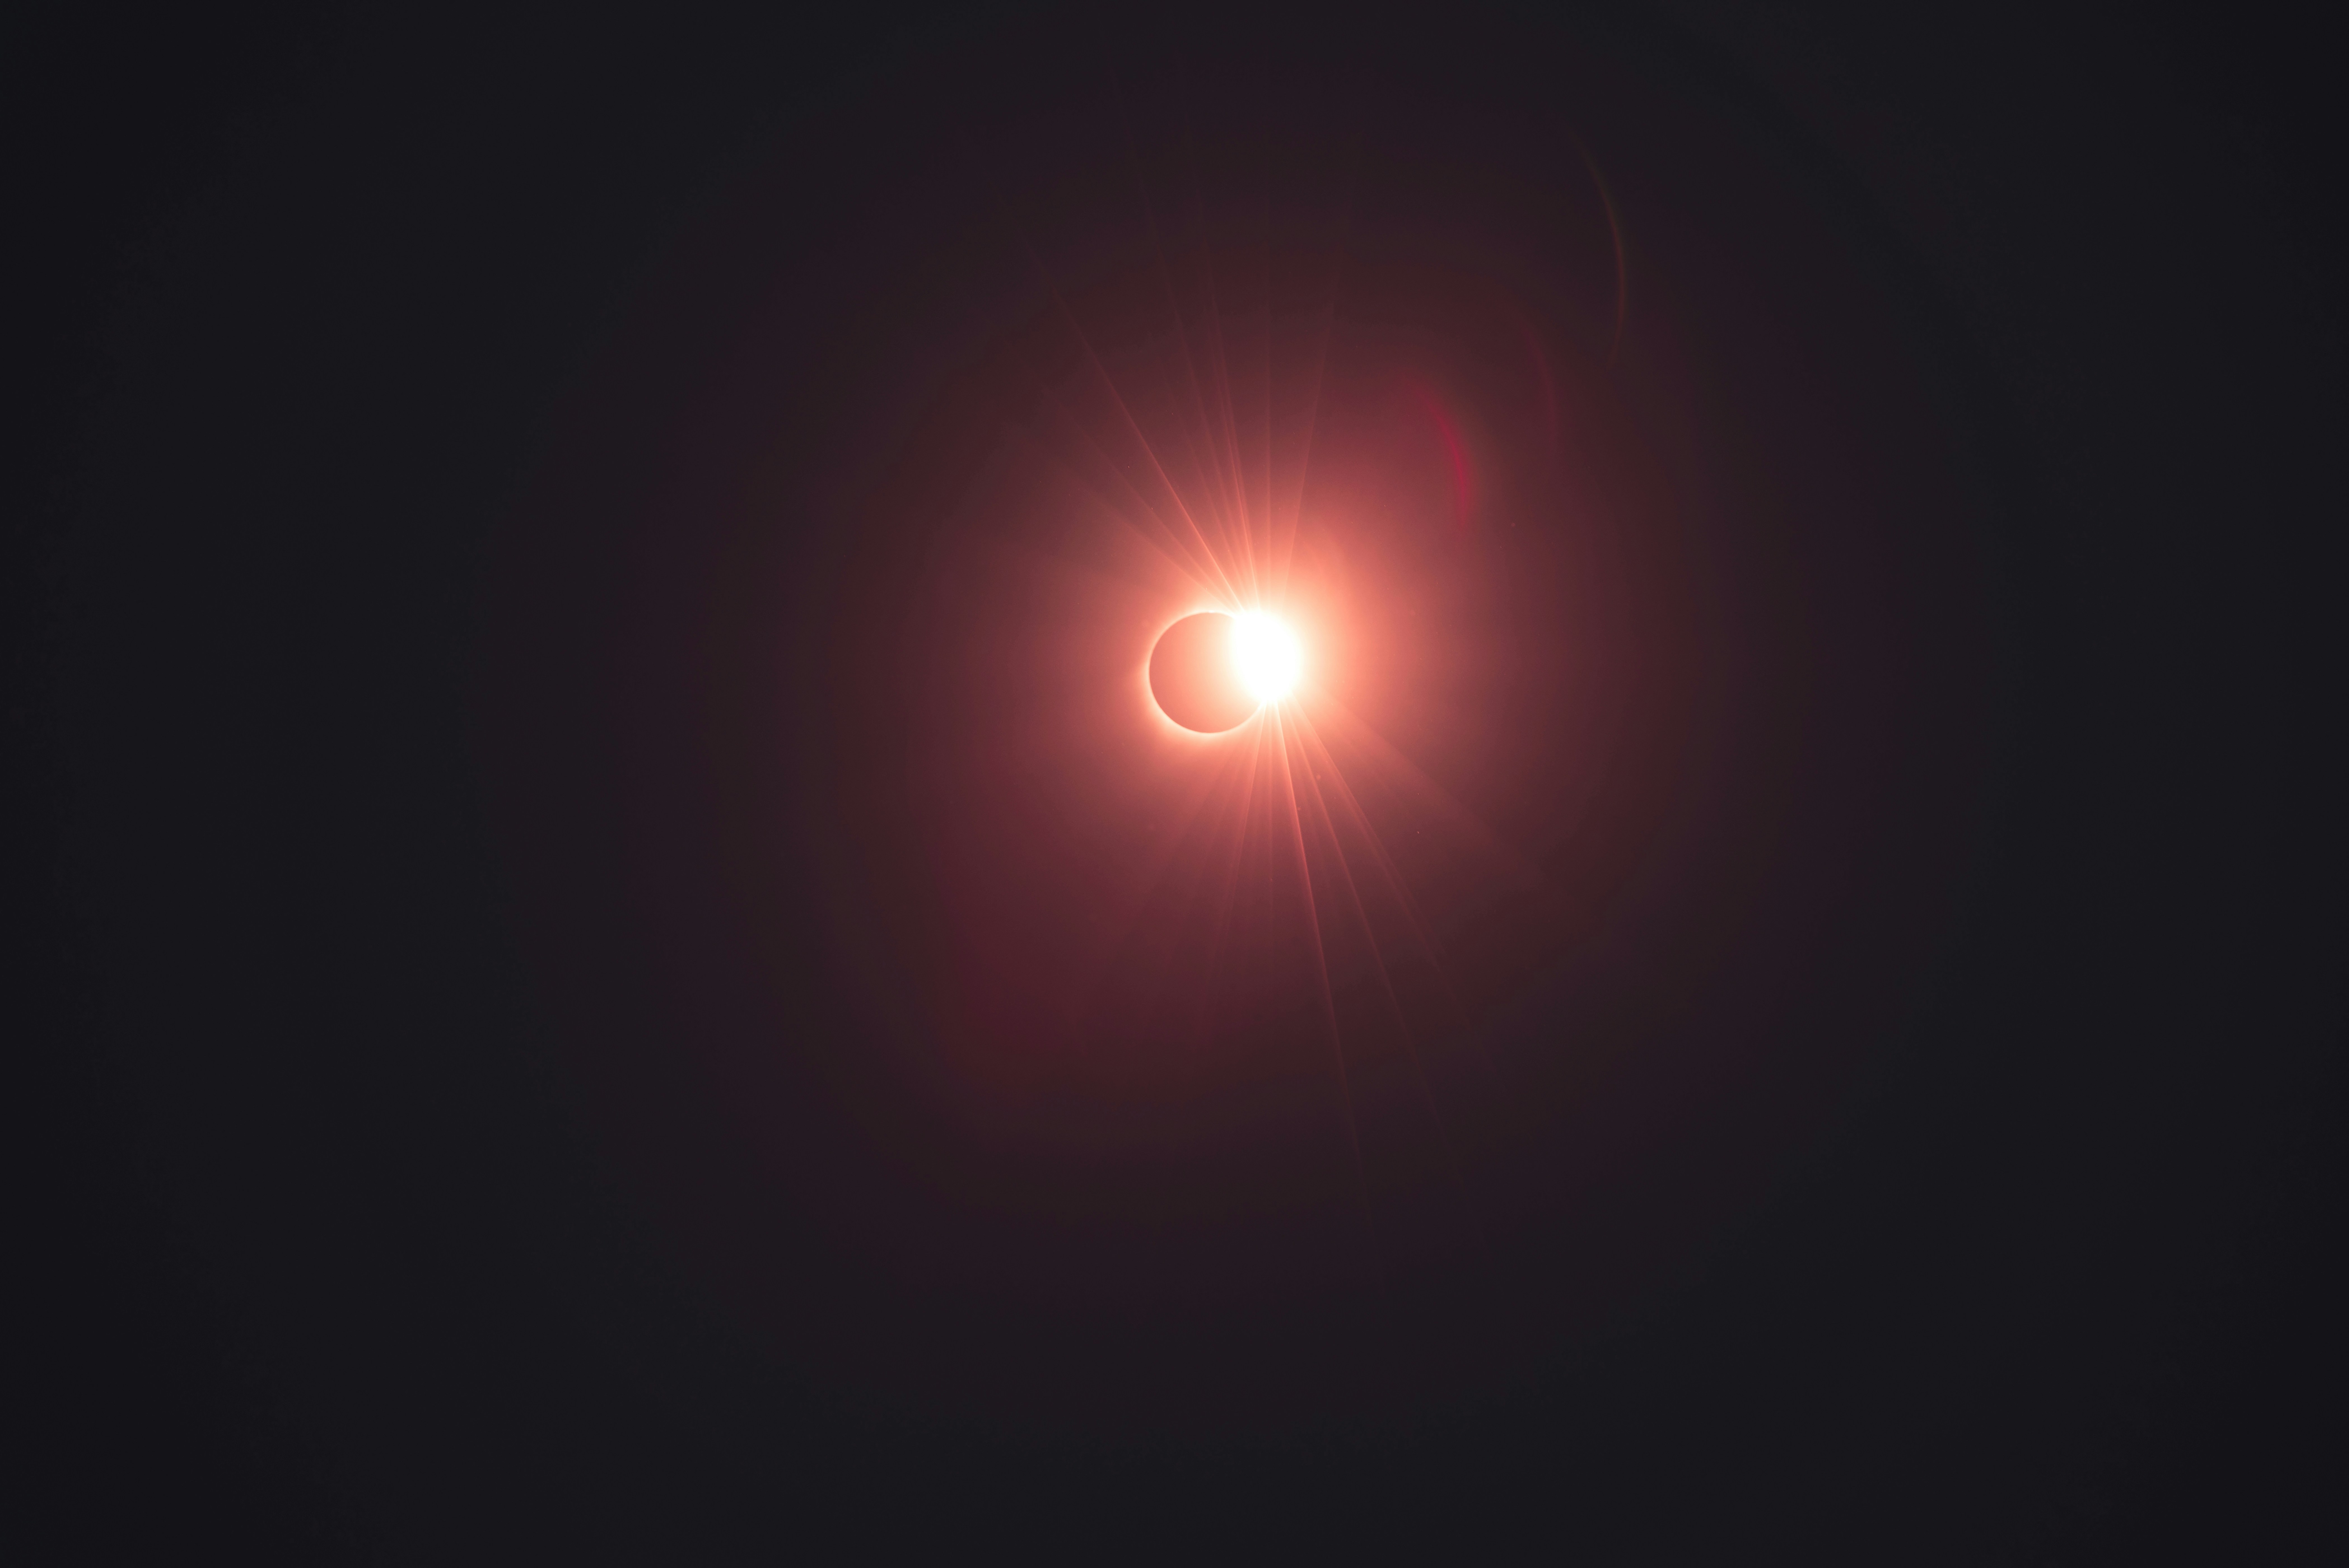 view of a solar eclipse